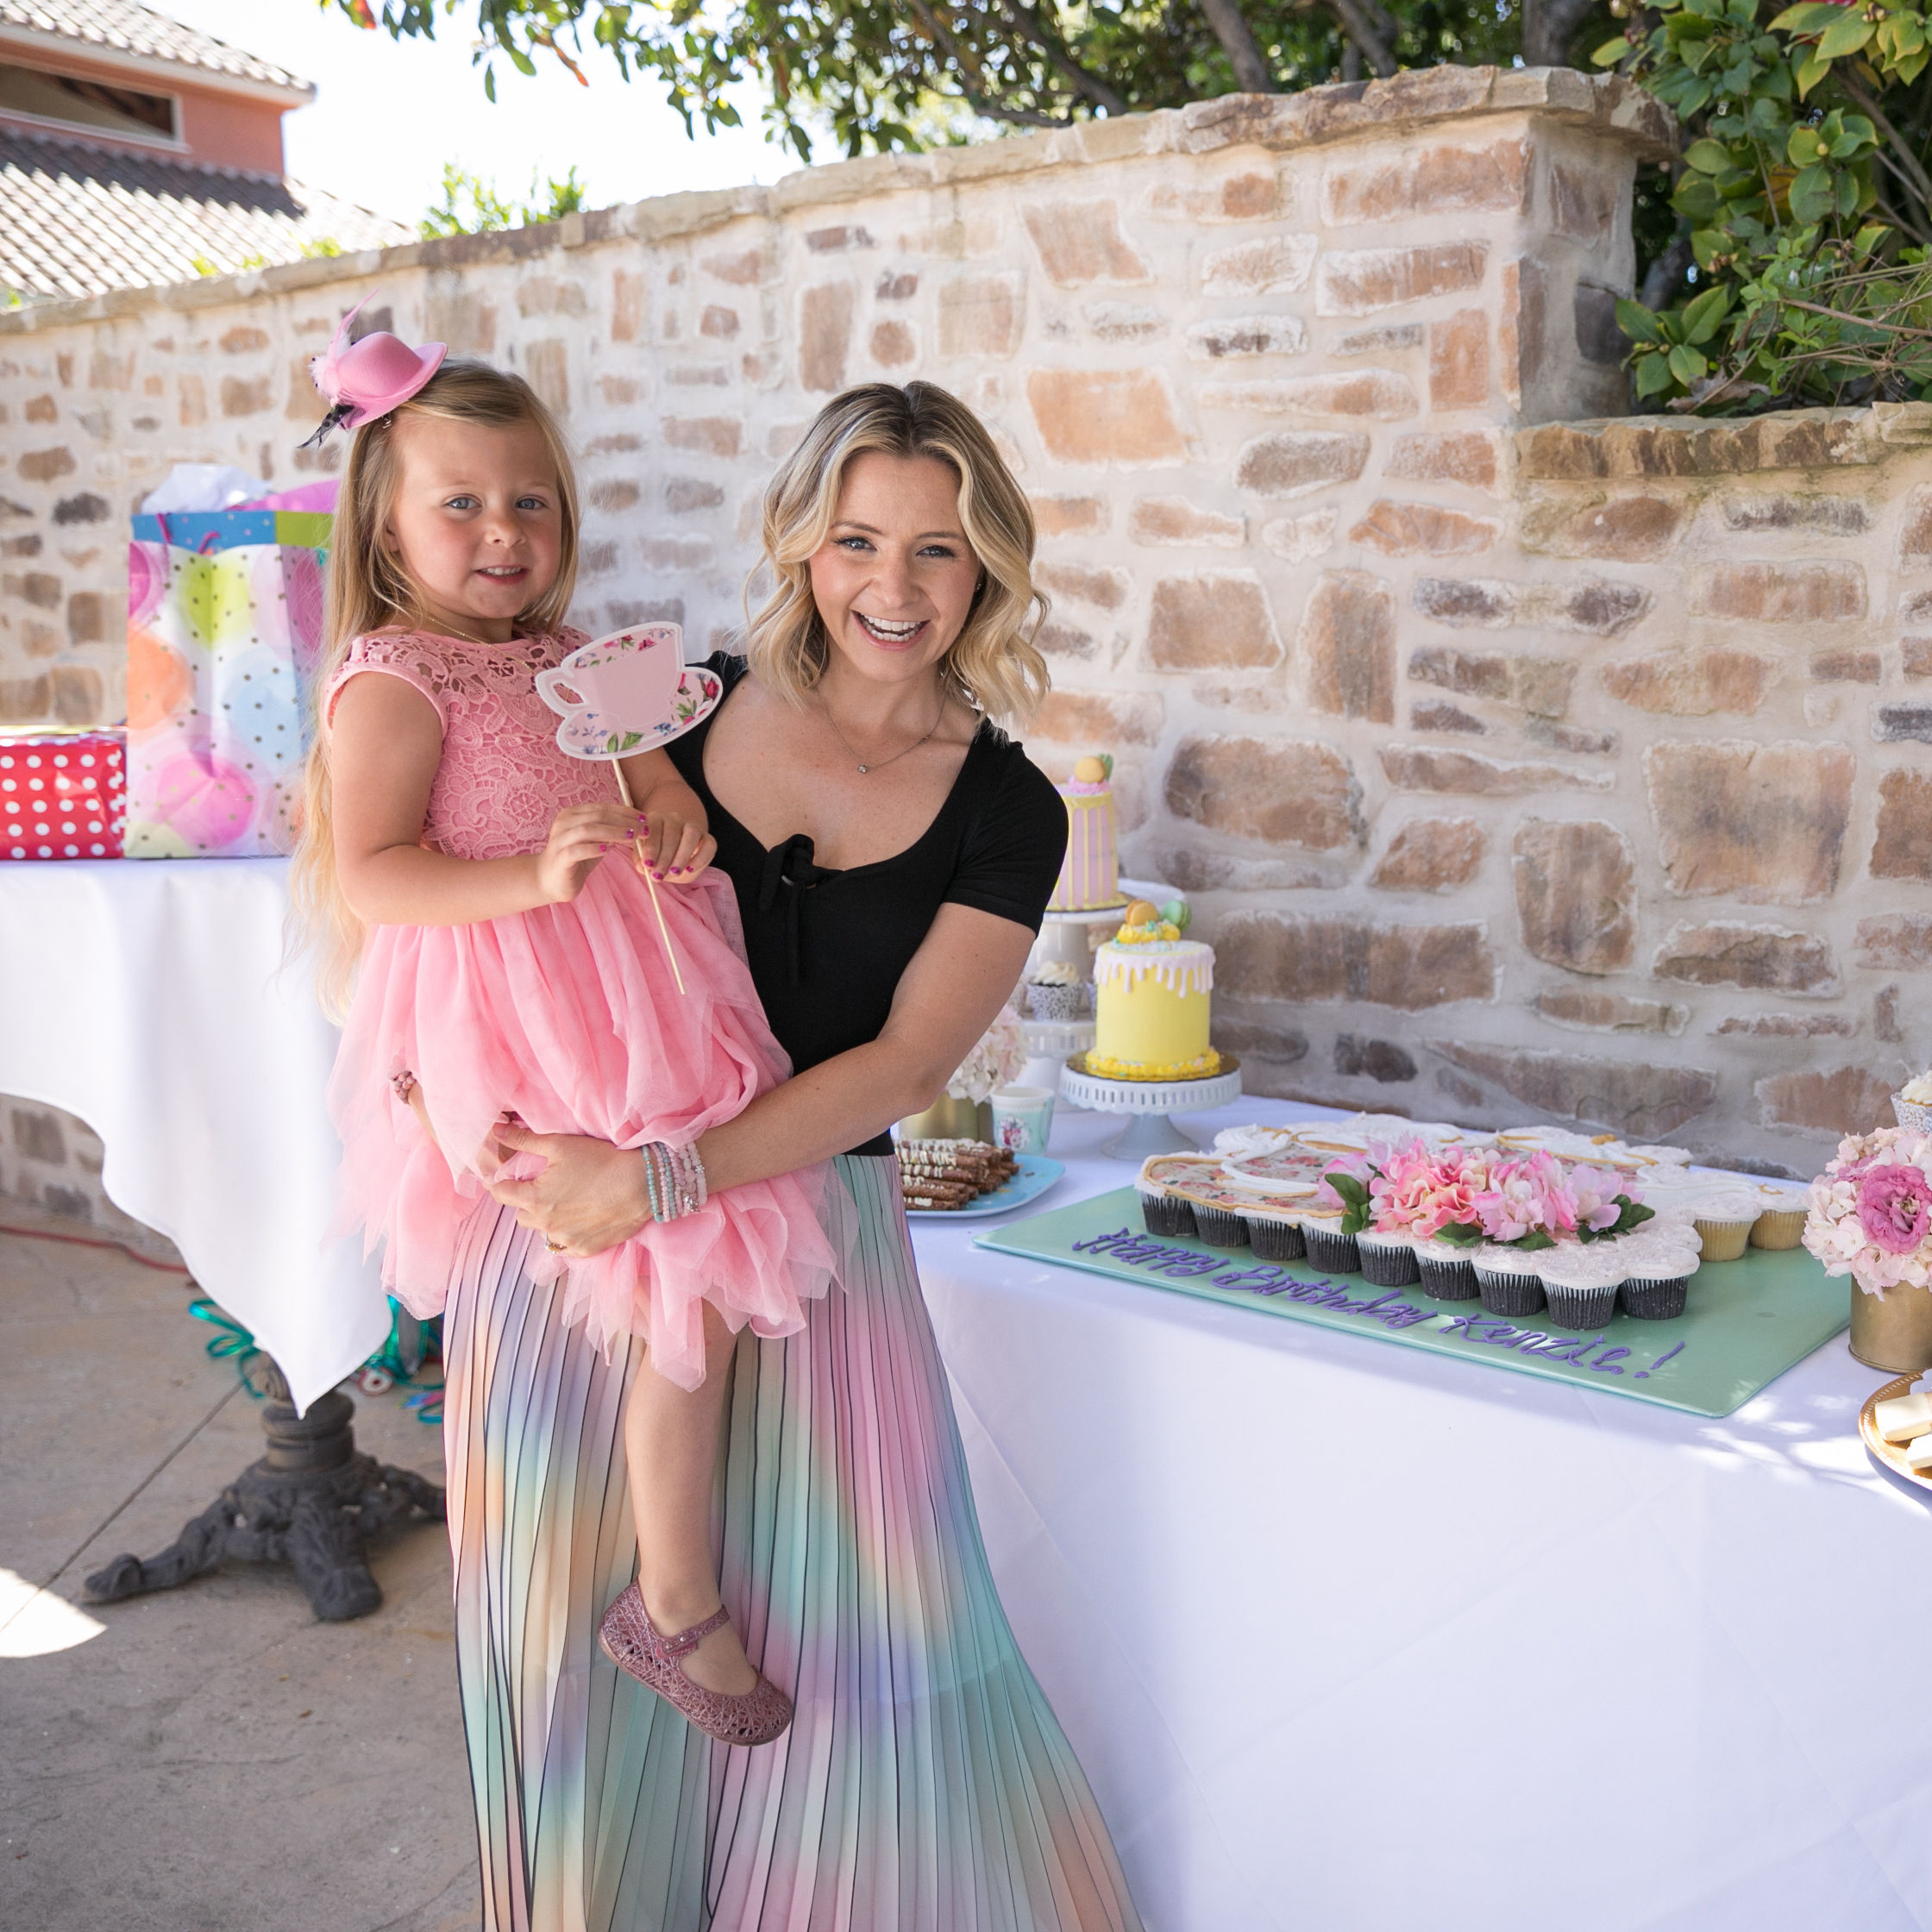 Actress Beverley Mitchell Reveals How She Threw Her Daughter the Perfect Birthday Tea Party